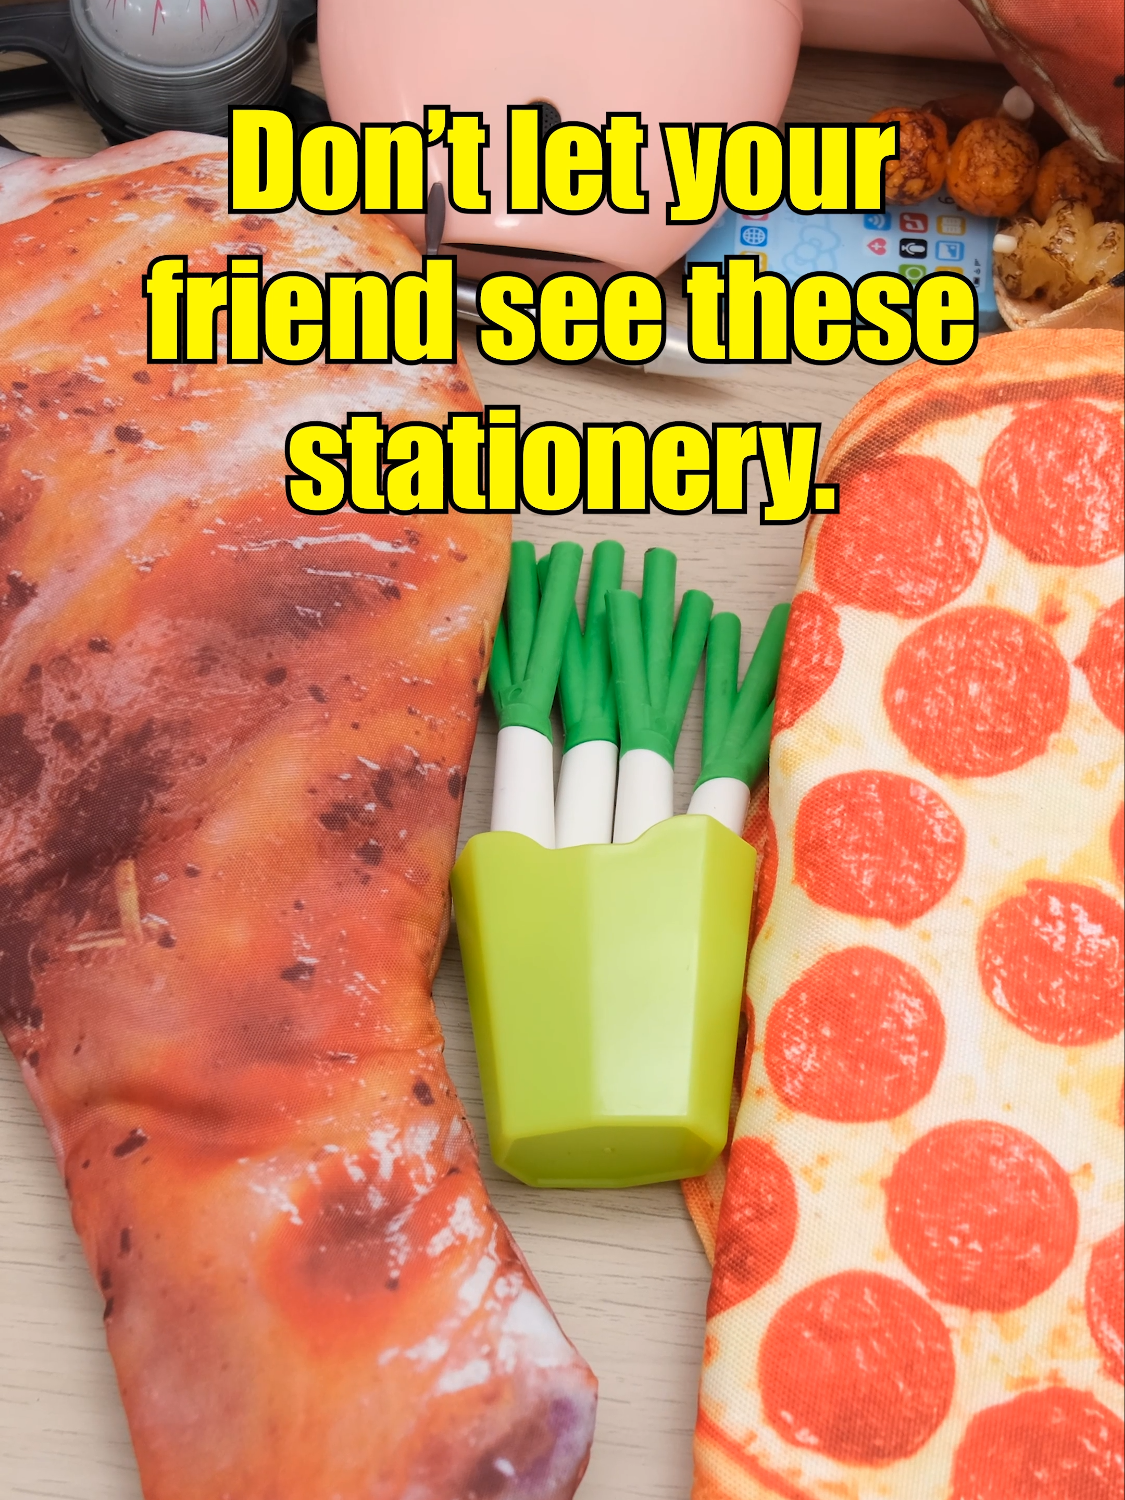 Don't let your friend see these stationery #capcut #stationerypal #stationery #fyp